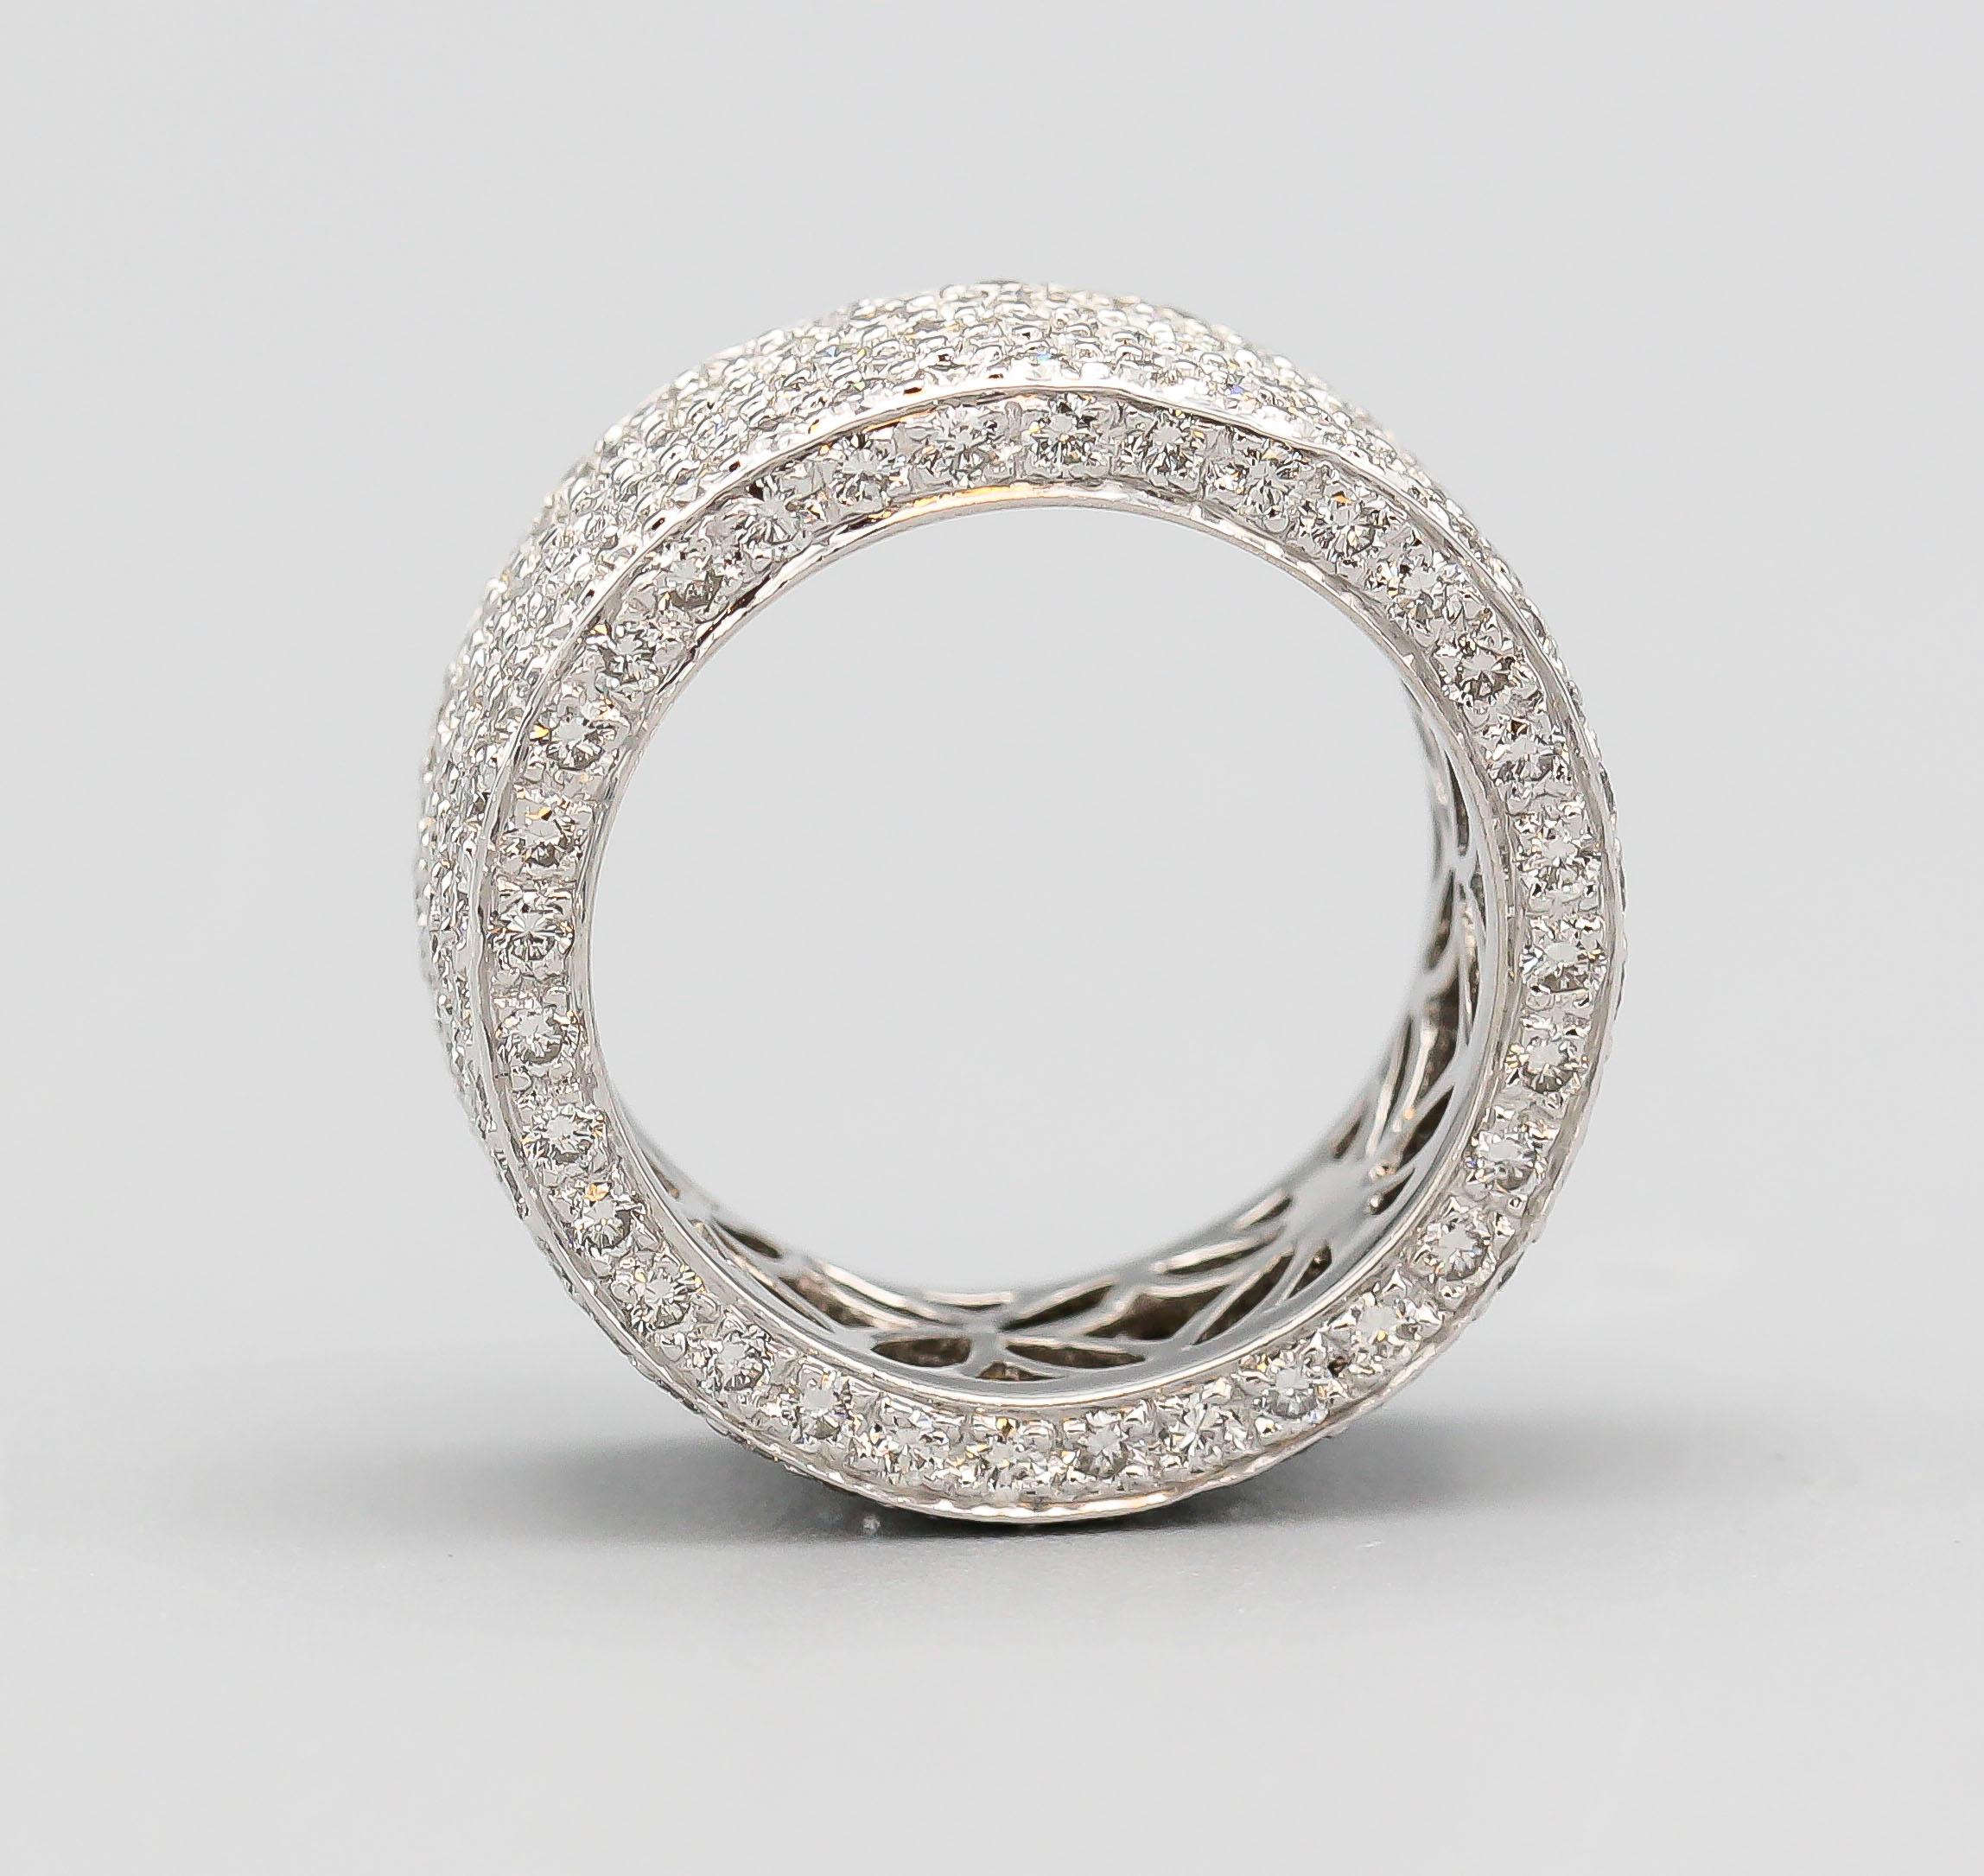 Fine diamond and 18k white gold band.  Features approx. 4.30 carats of round brilliant cut diamonds of approx. G-H color and VS approx. clarity. Size 6.25 and approx. 9 mm wide.

Hallmarks: K18, D 4.30

